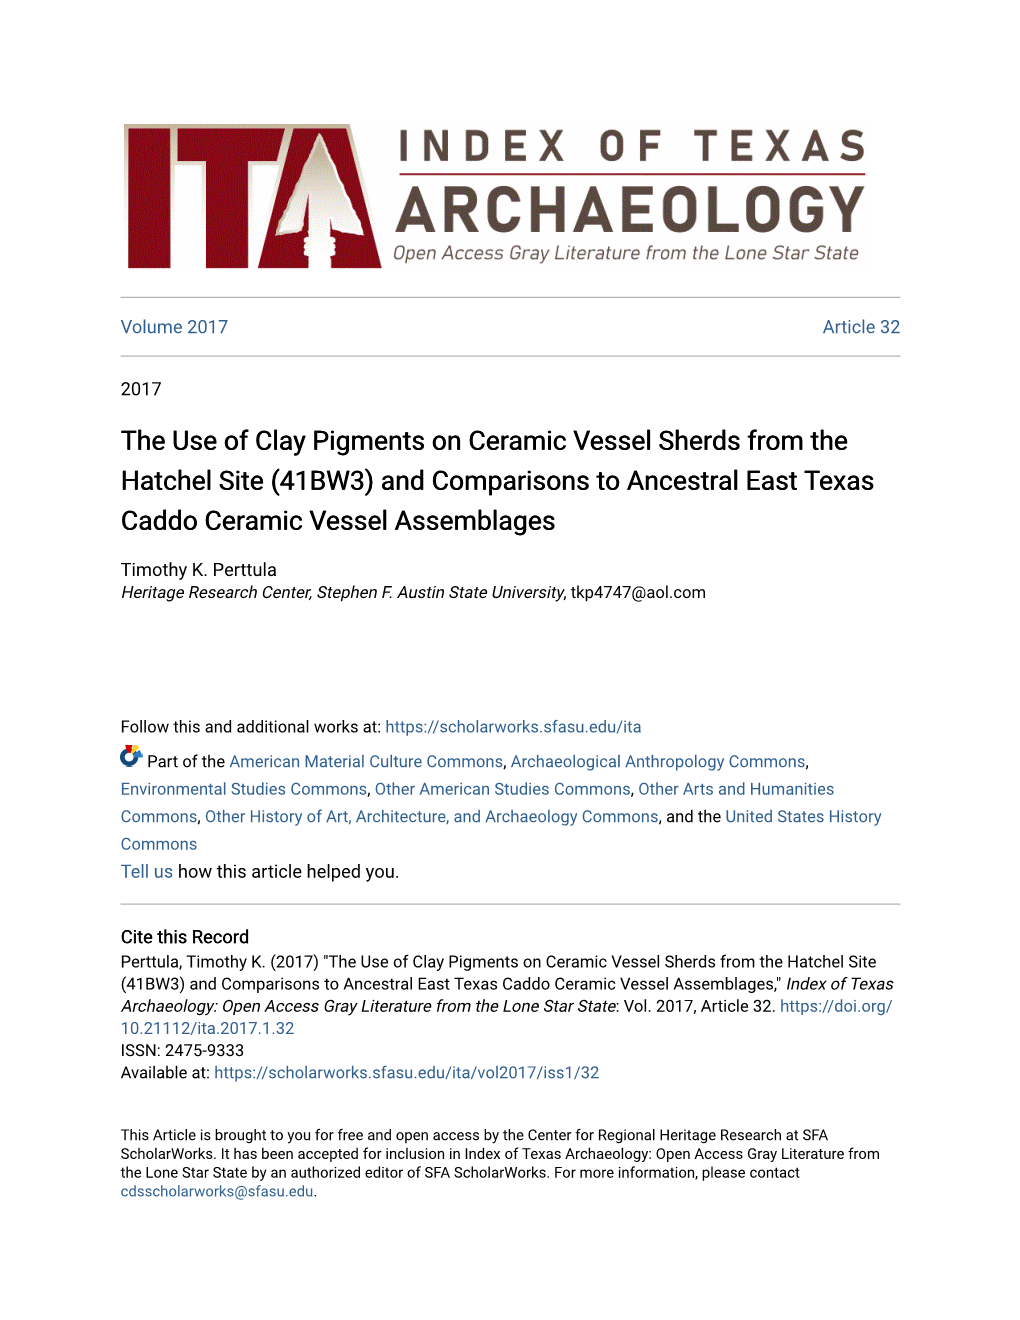 The Use of Clay Pigments on Ceramic Vessel Sherds from the Hatchel Site (41BW3) and Comparisons to Ancestral East Texas Caddo Ceramic Vessel Assemblages